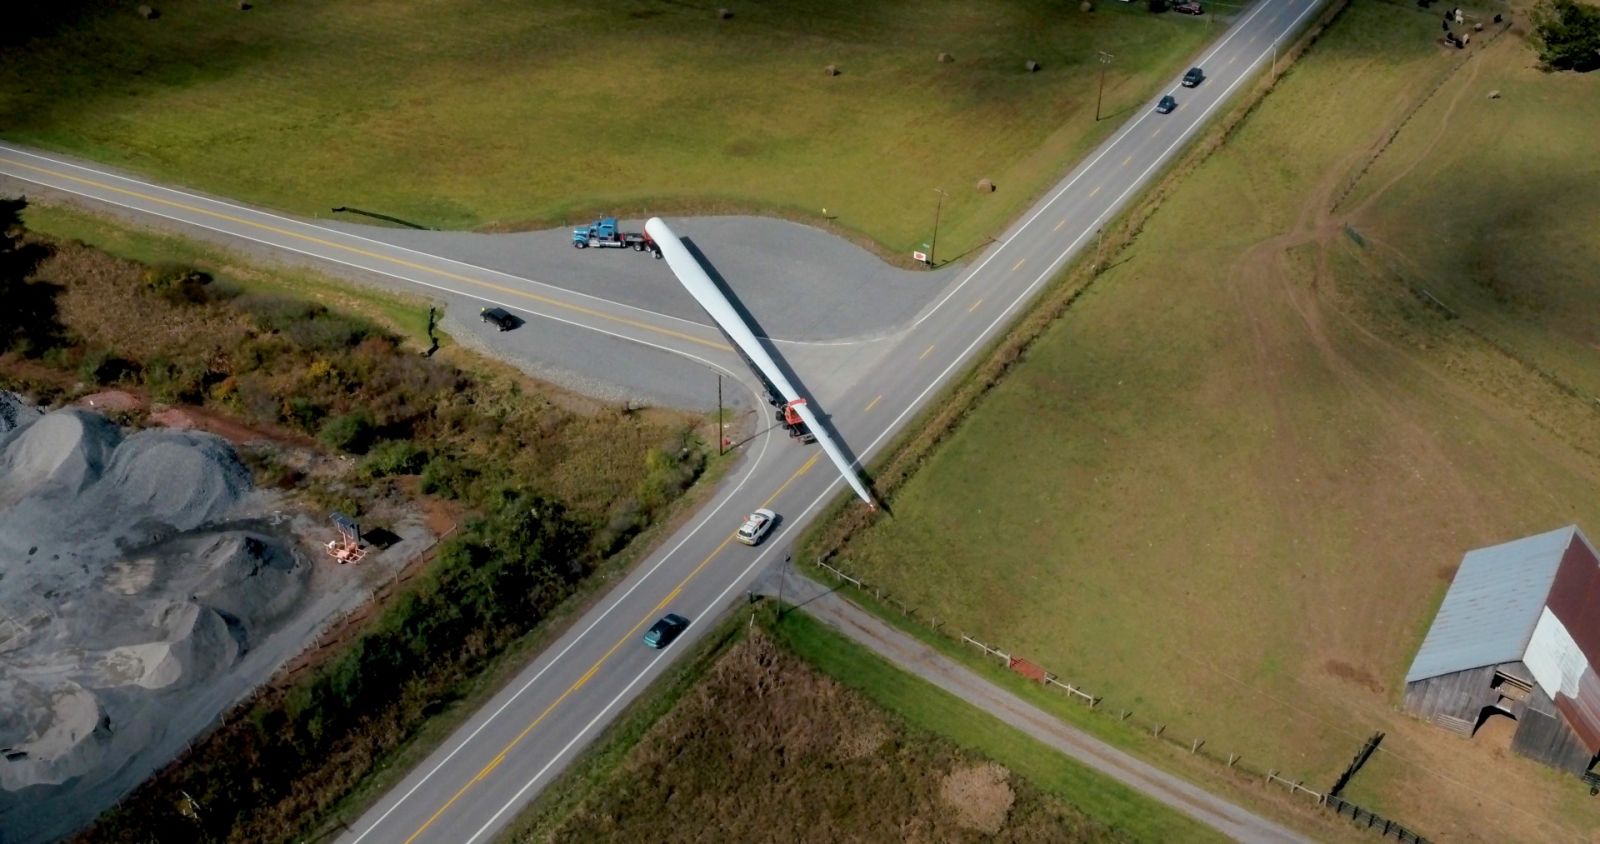 Greenville-based Logisticus manages the transport of turbine blades, some reaching almost 165 long, after the blades are retired from service. (Photo/Provided)